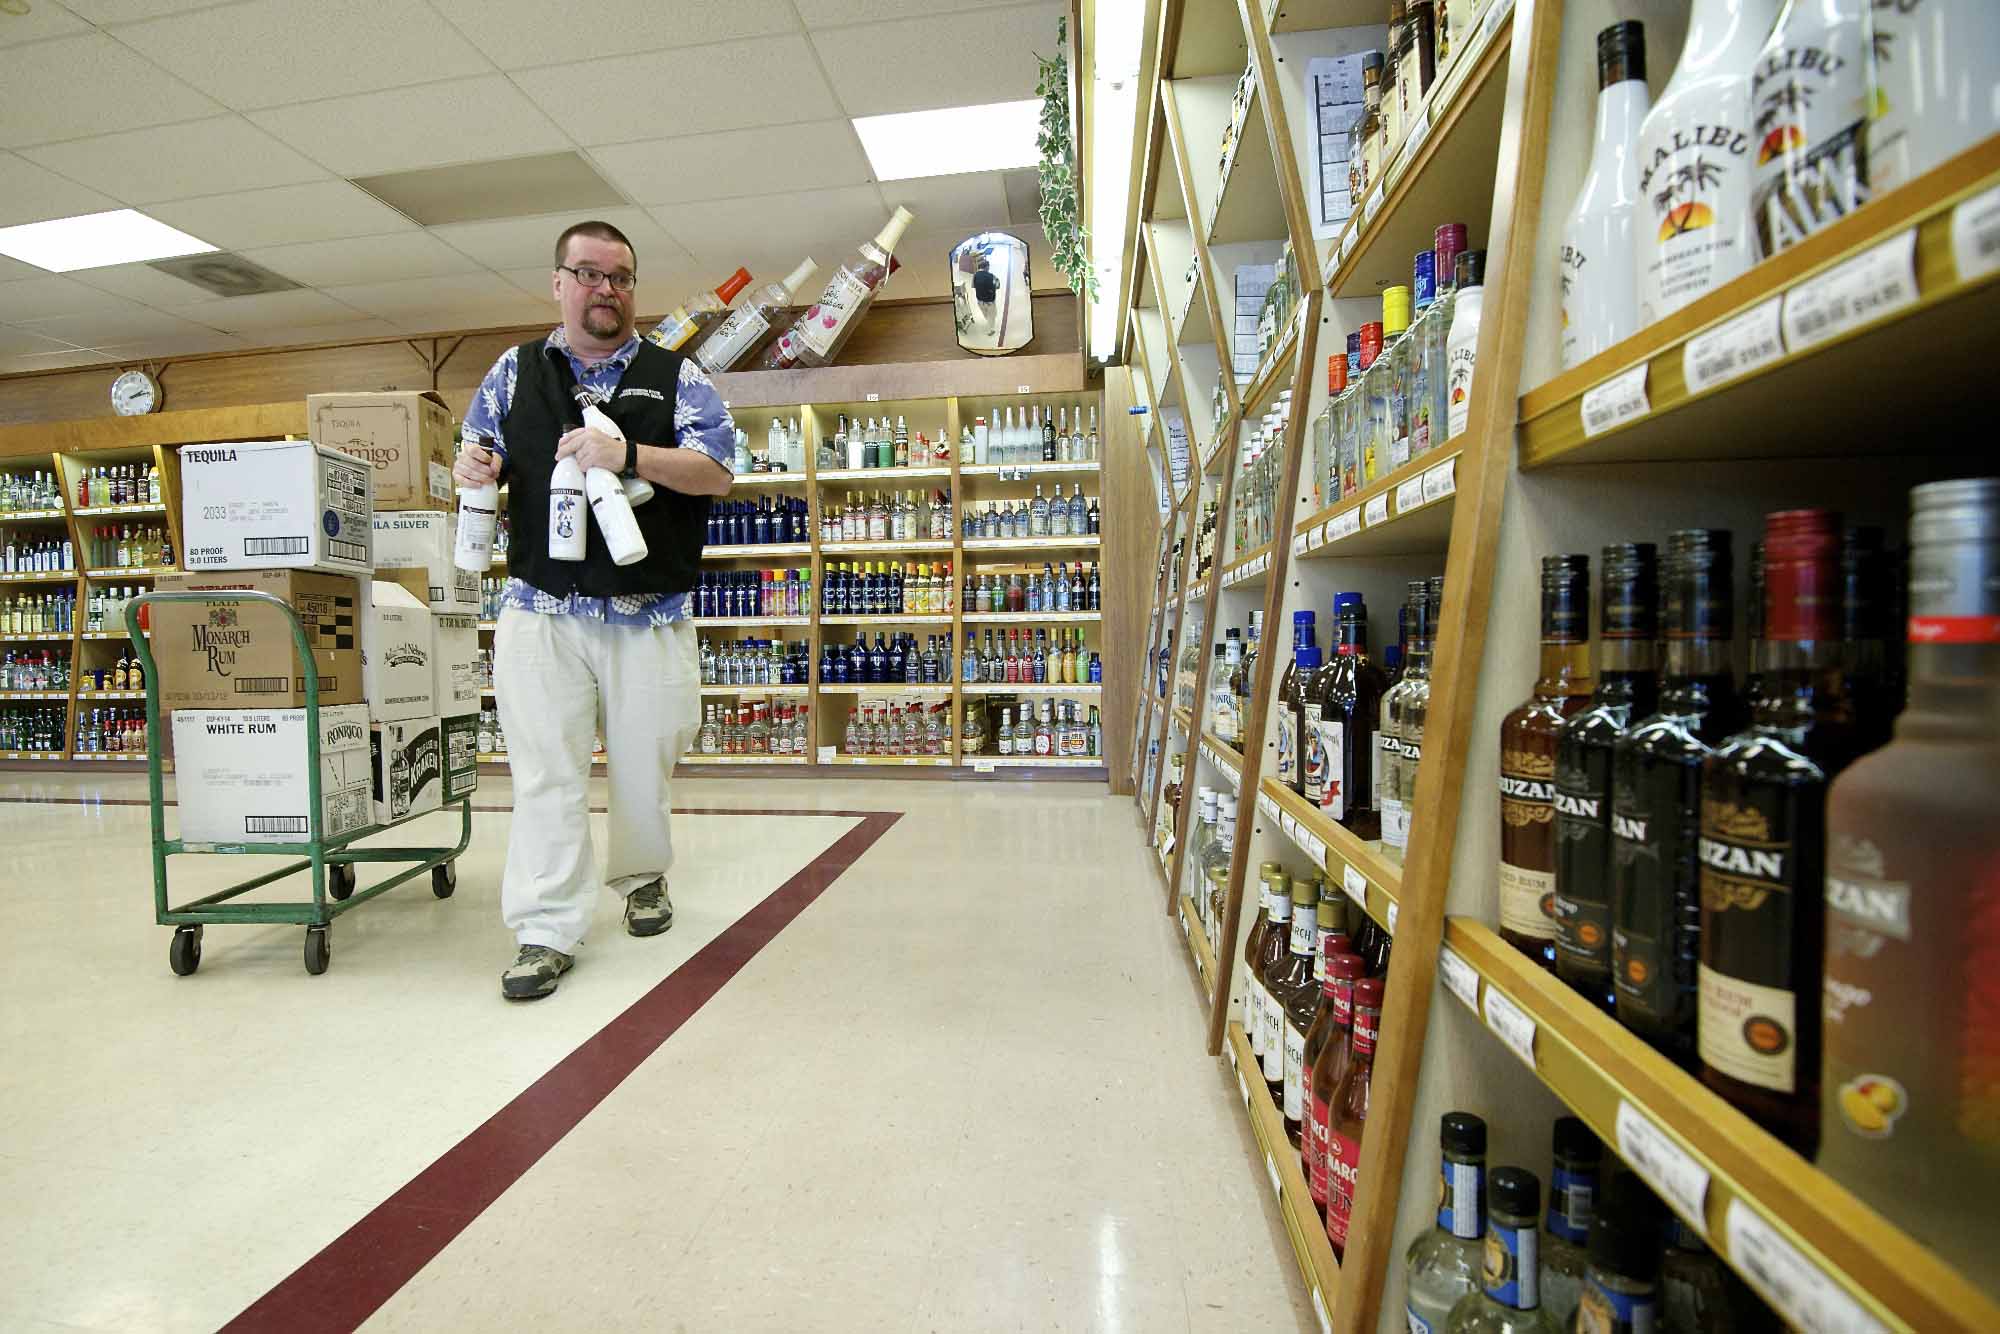 Eric Simonson stocks liquor shelves at a State owned liquor store, #10, one of the oldest stores in the system, Monday in Vancouver